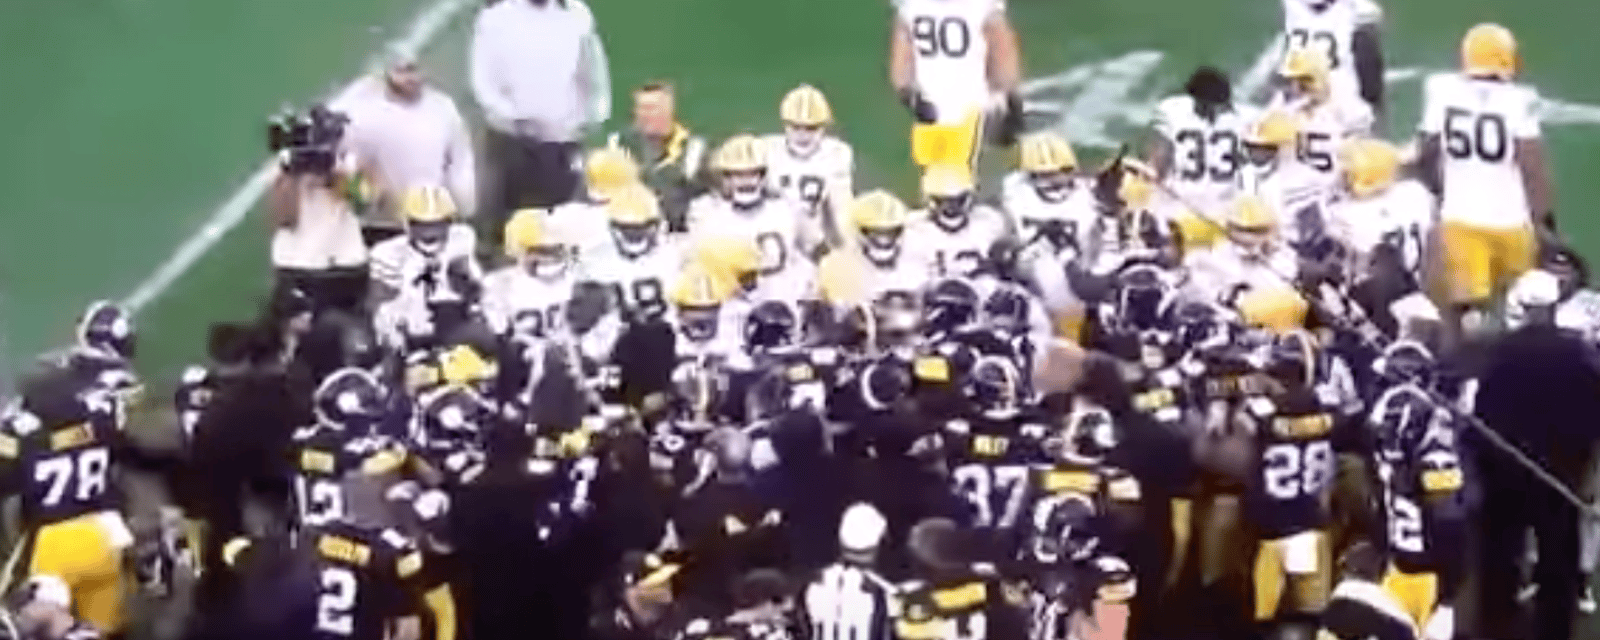 Mini-brawl breaks out at end of Steelers-Packers game 